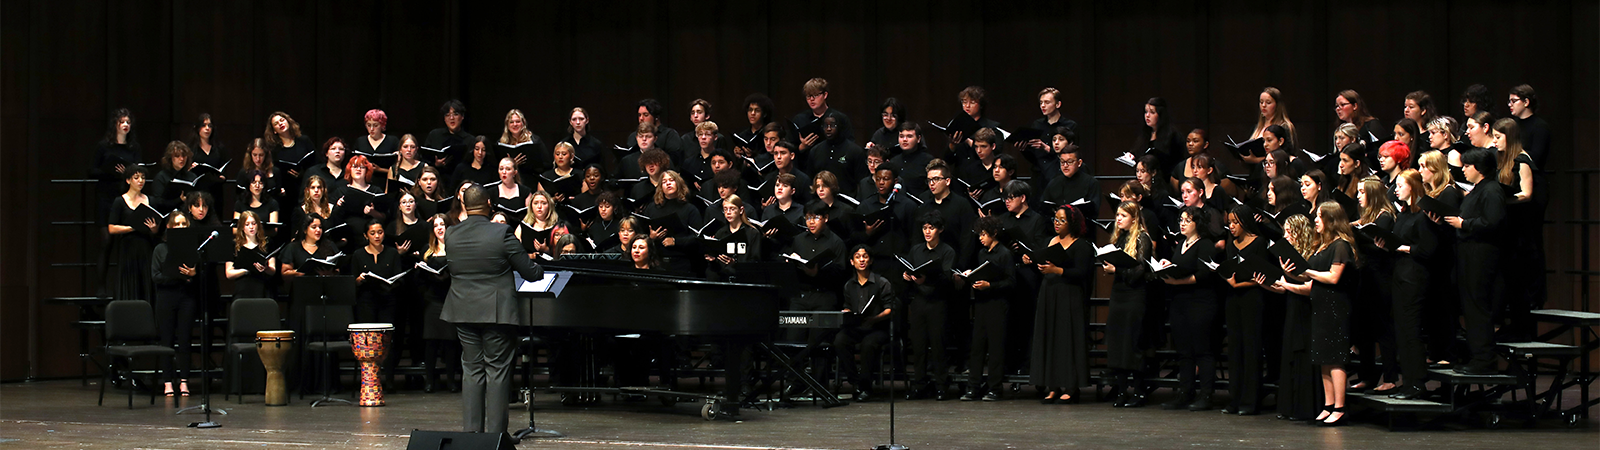 PHS Choir students advance to state in solo and ensemble